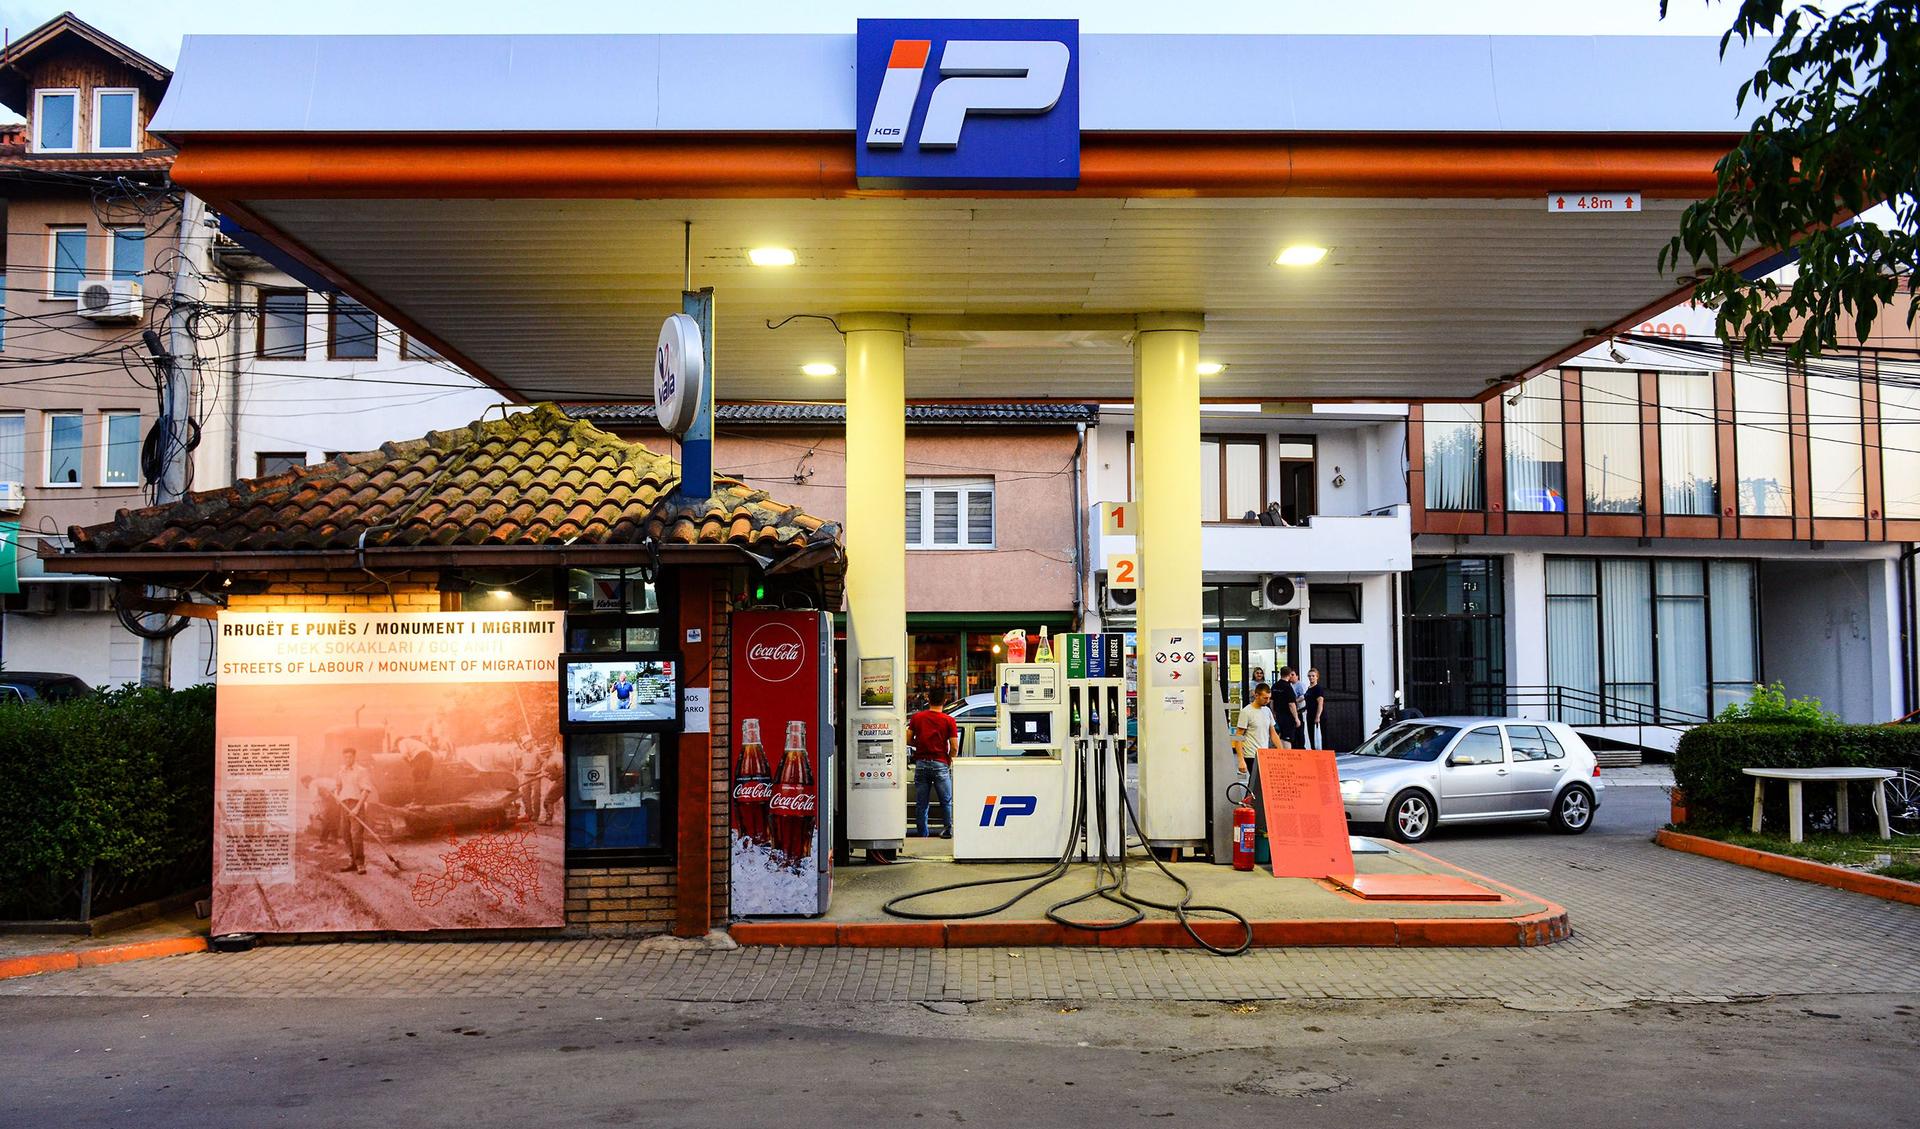 A wall of a petrol station is used as a display for historical documentation.